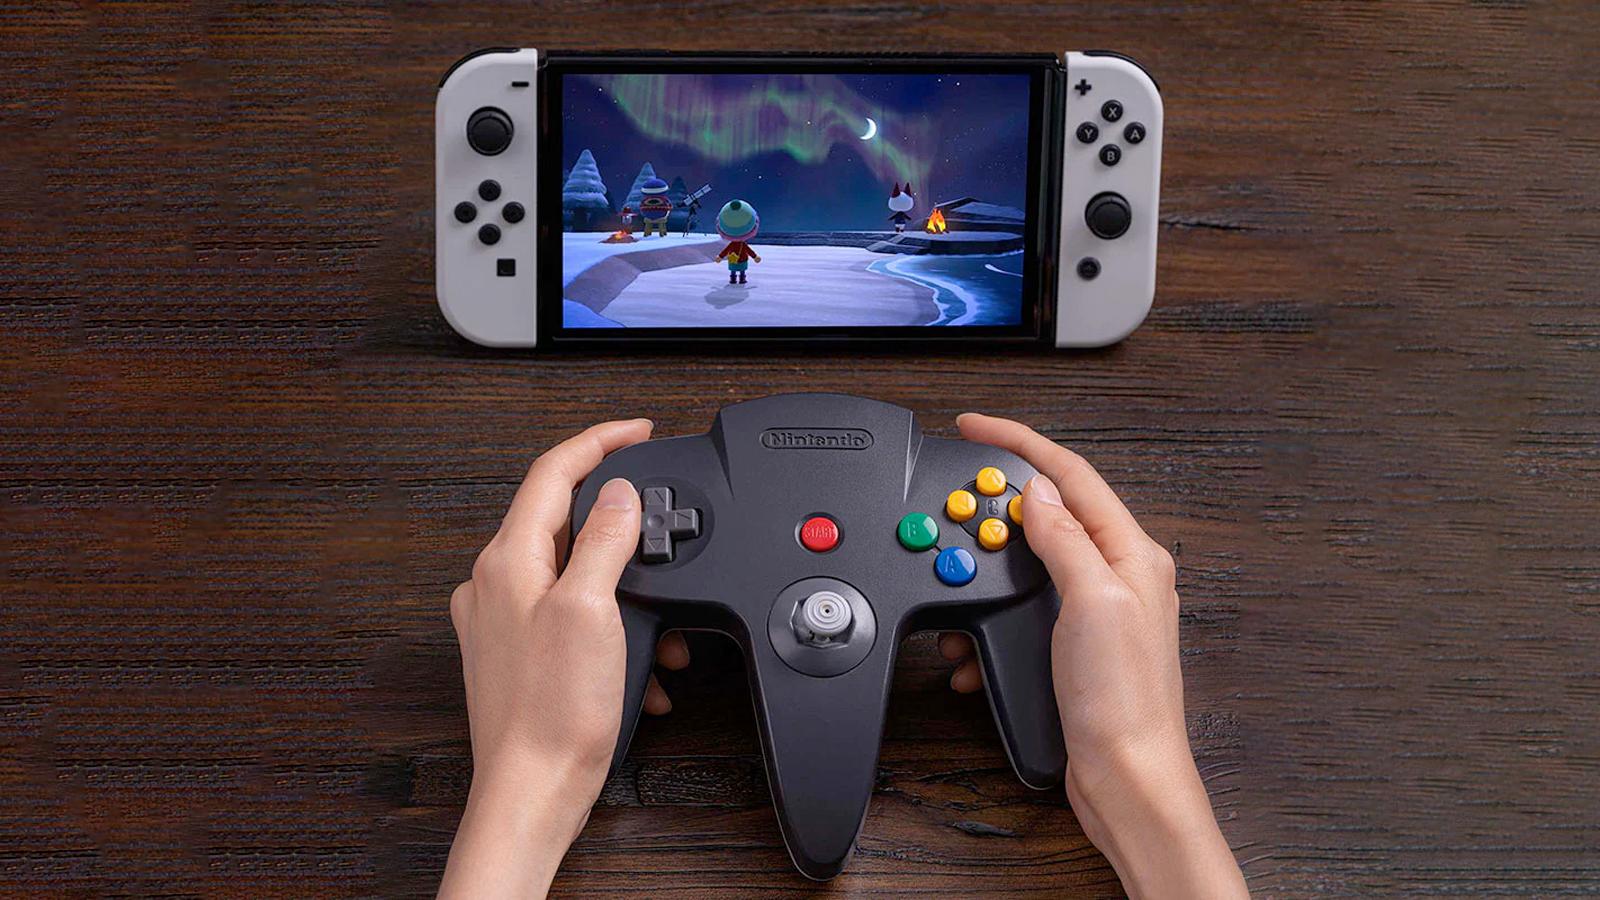 N64 controller from 8BitDo